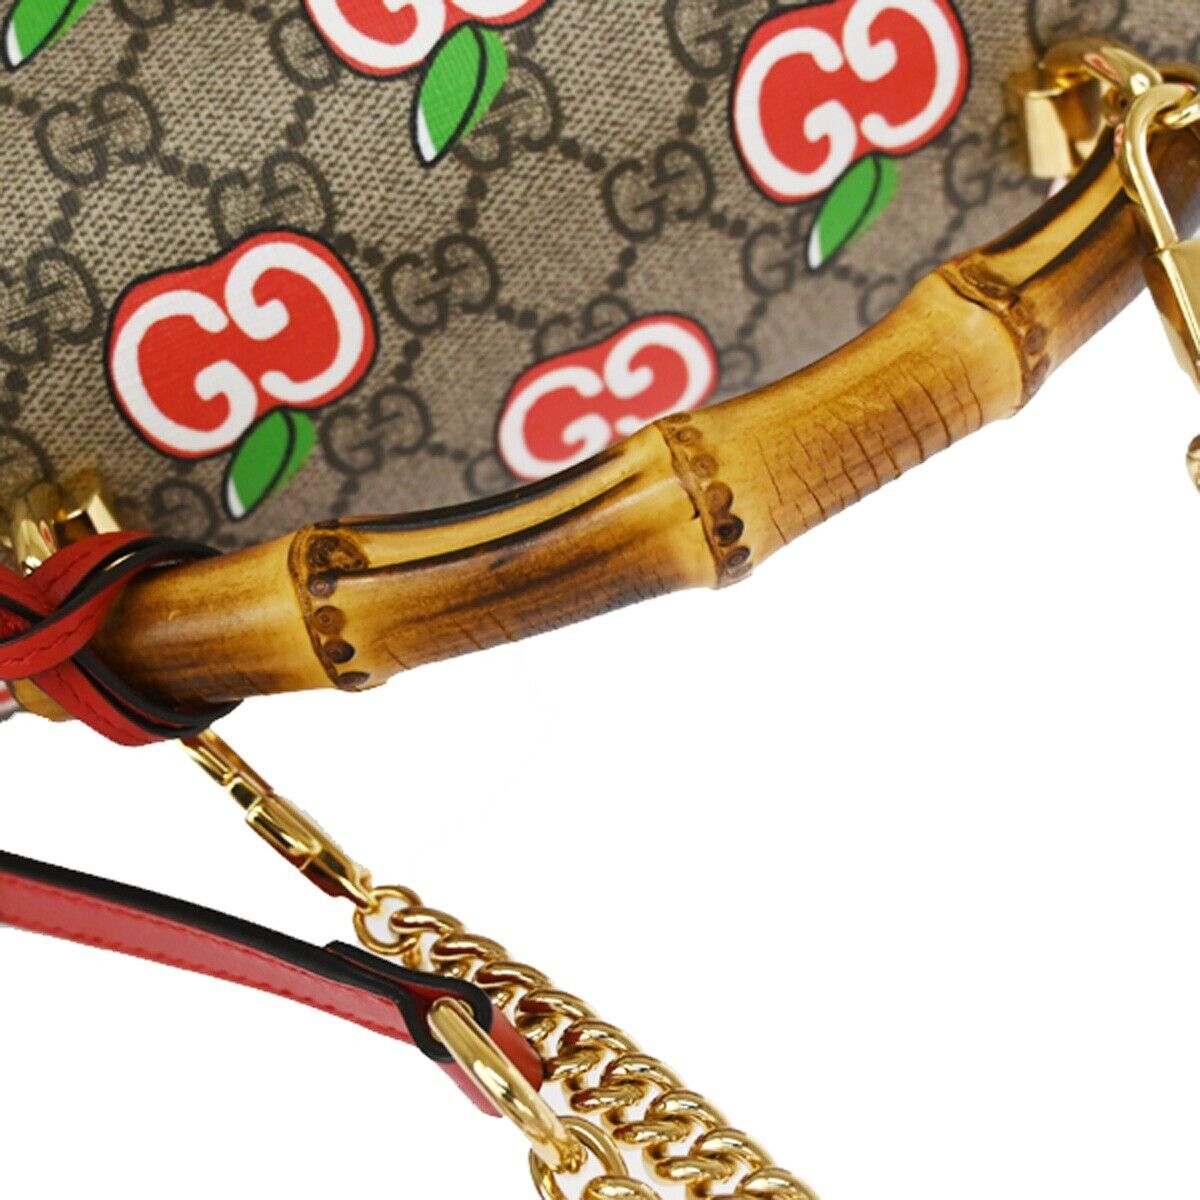 Gucci Women's Bamboo Leather Shoulder Bag with Gold Hardware in Multicolour